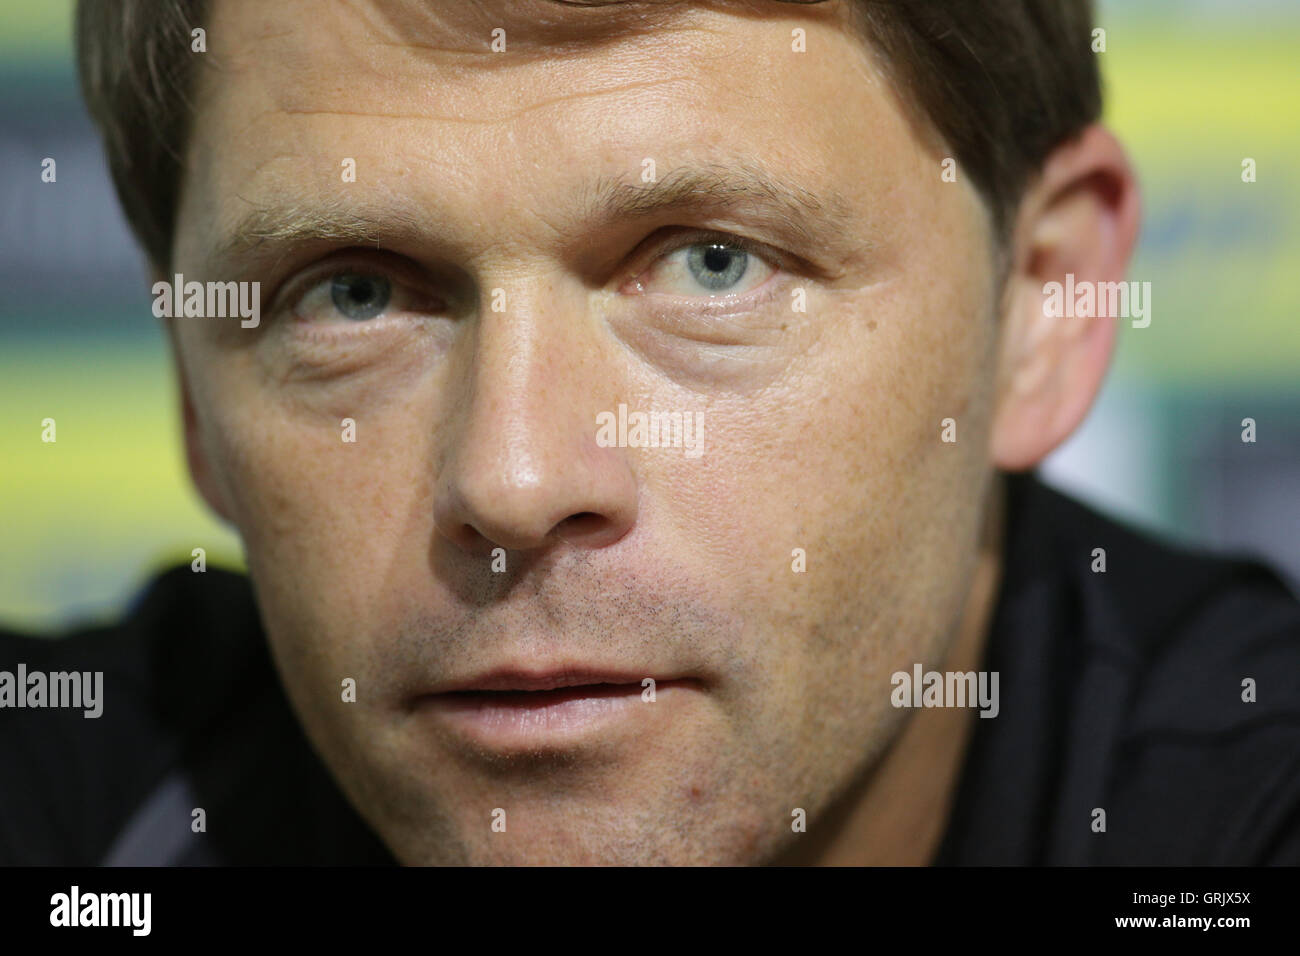 Sofia, Bulgaria - September 5, 2016: Manager of Luxembourg's national football team Luc Holtz is speaking to the media during a  Stock Photo